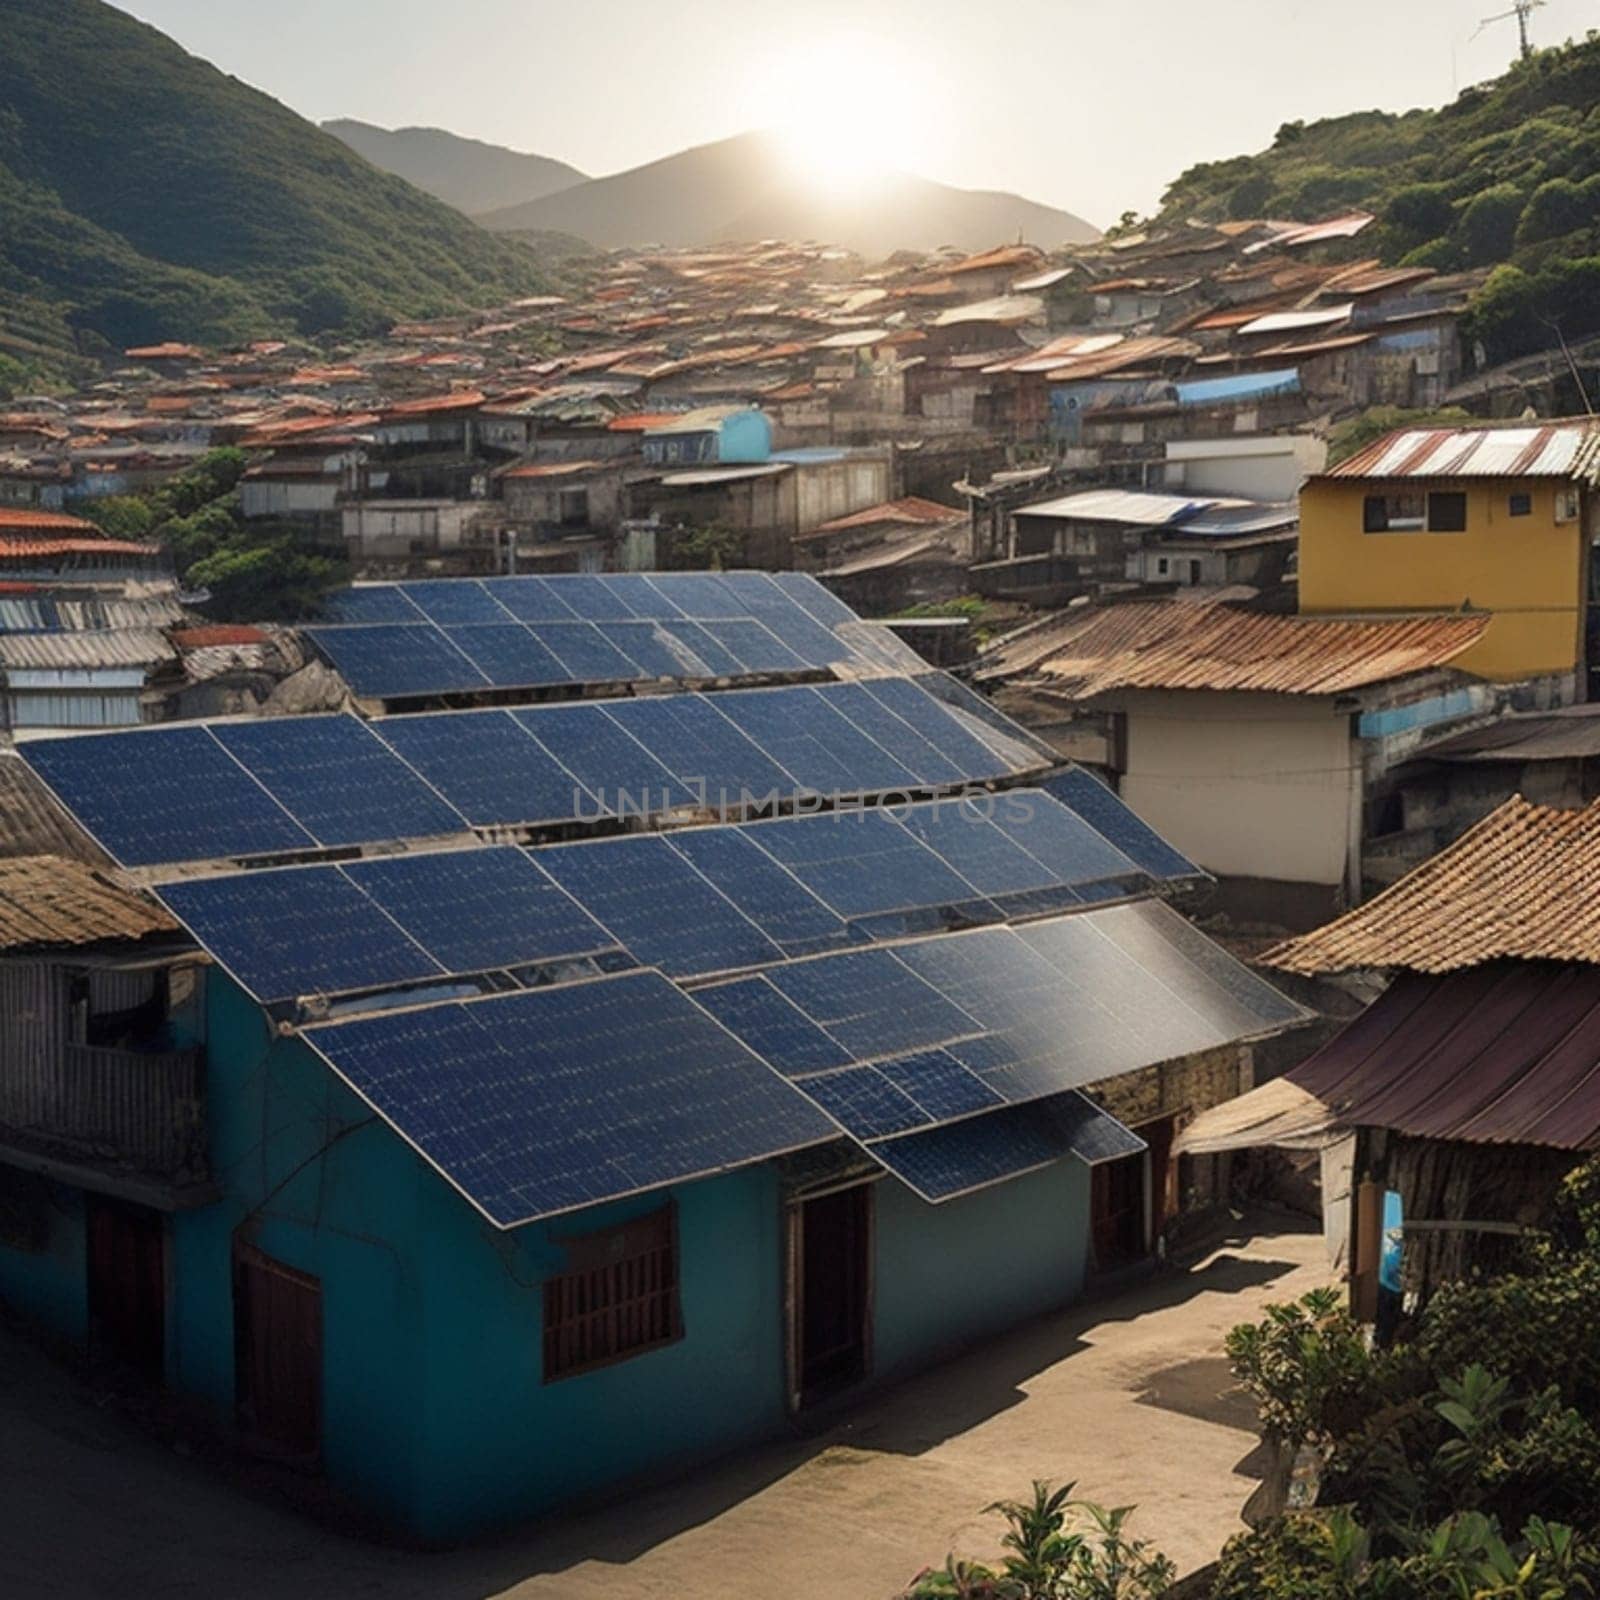 photovoltaic solar panels on slum hood for clean and cheap energy by verbano